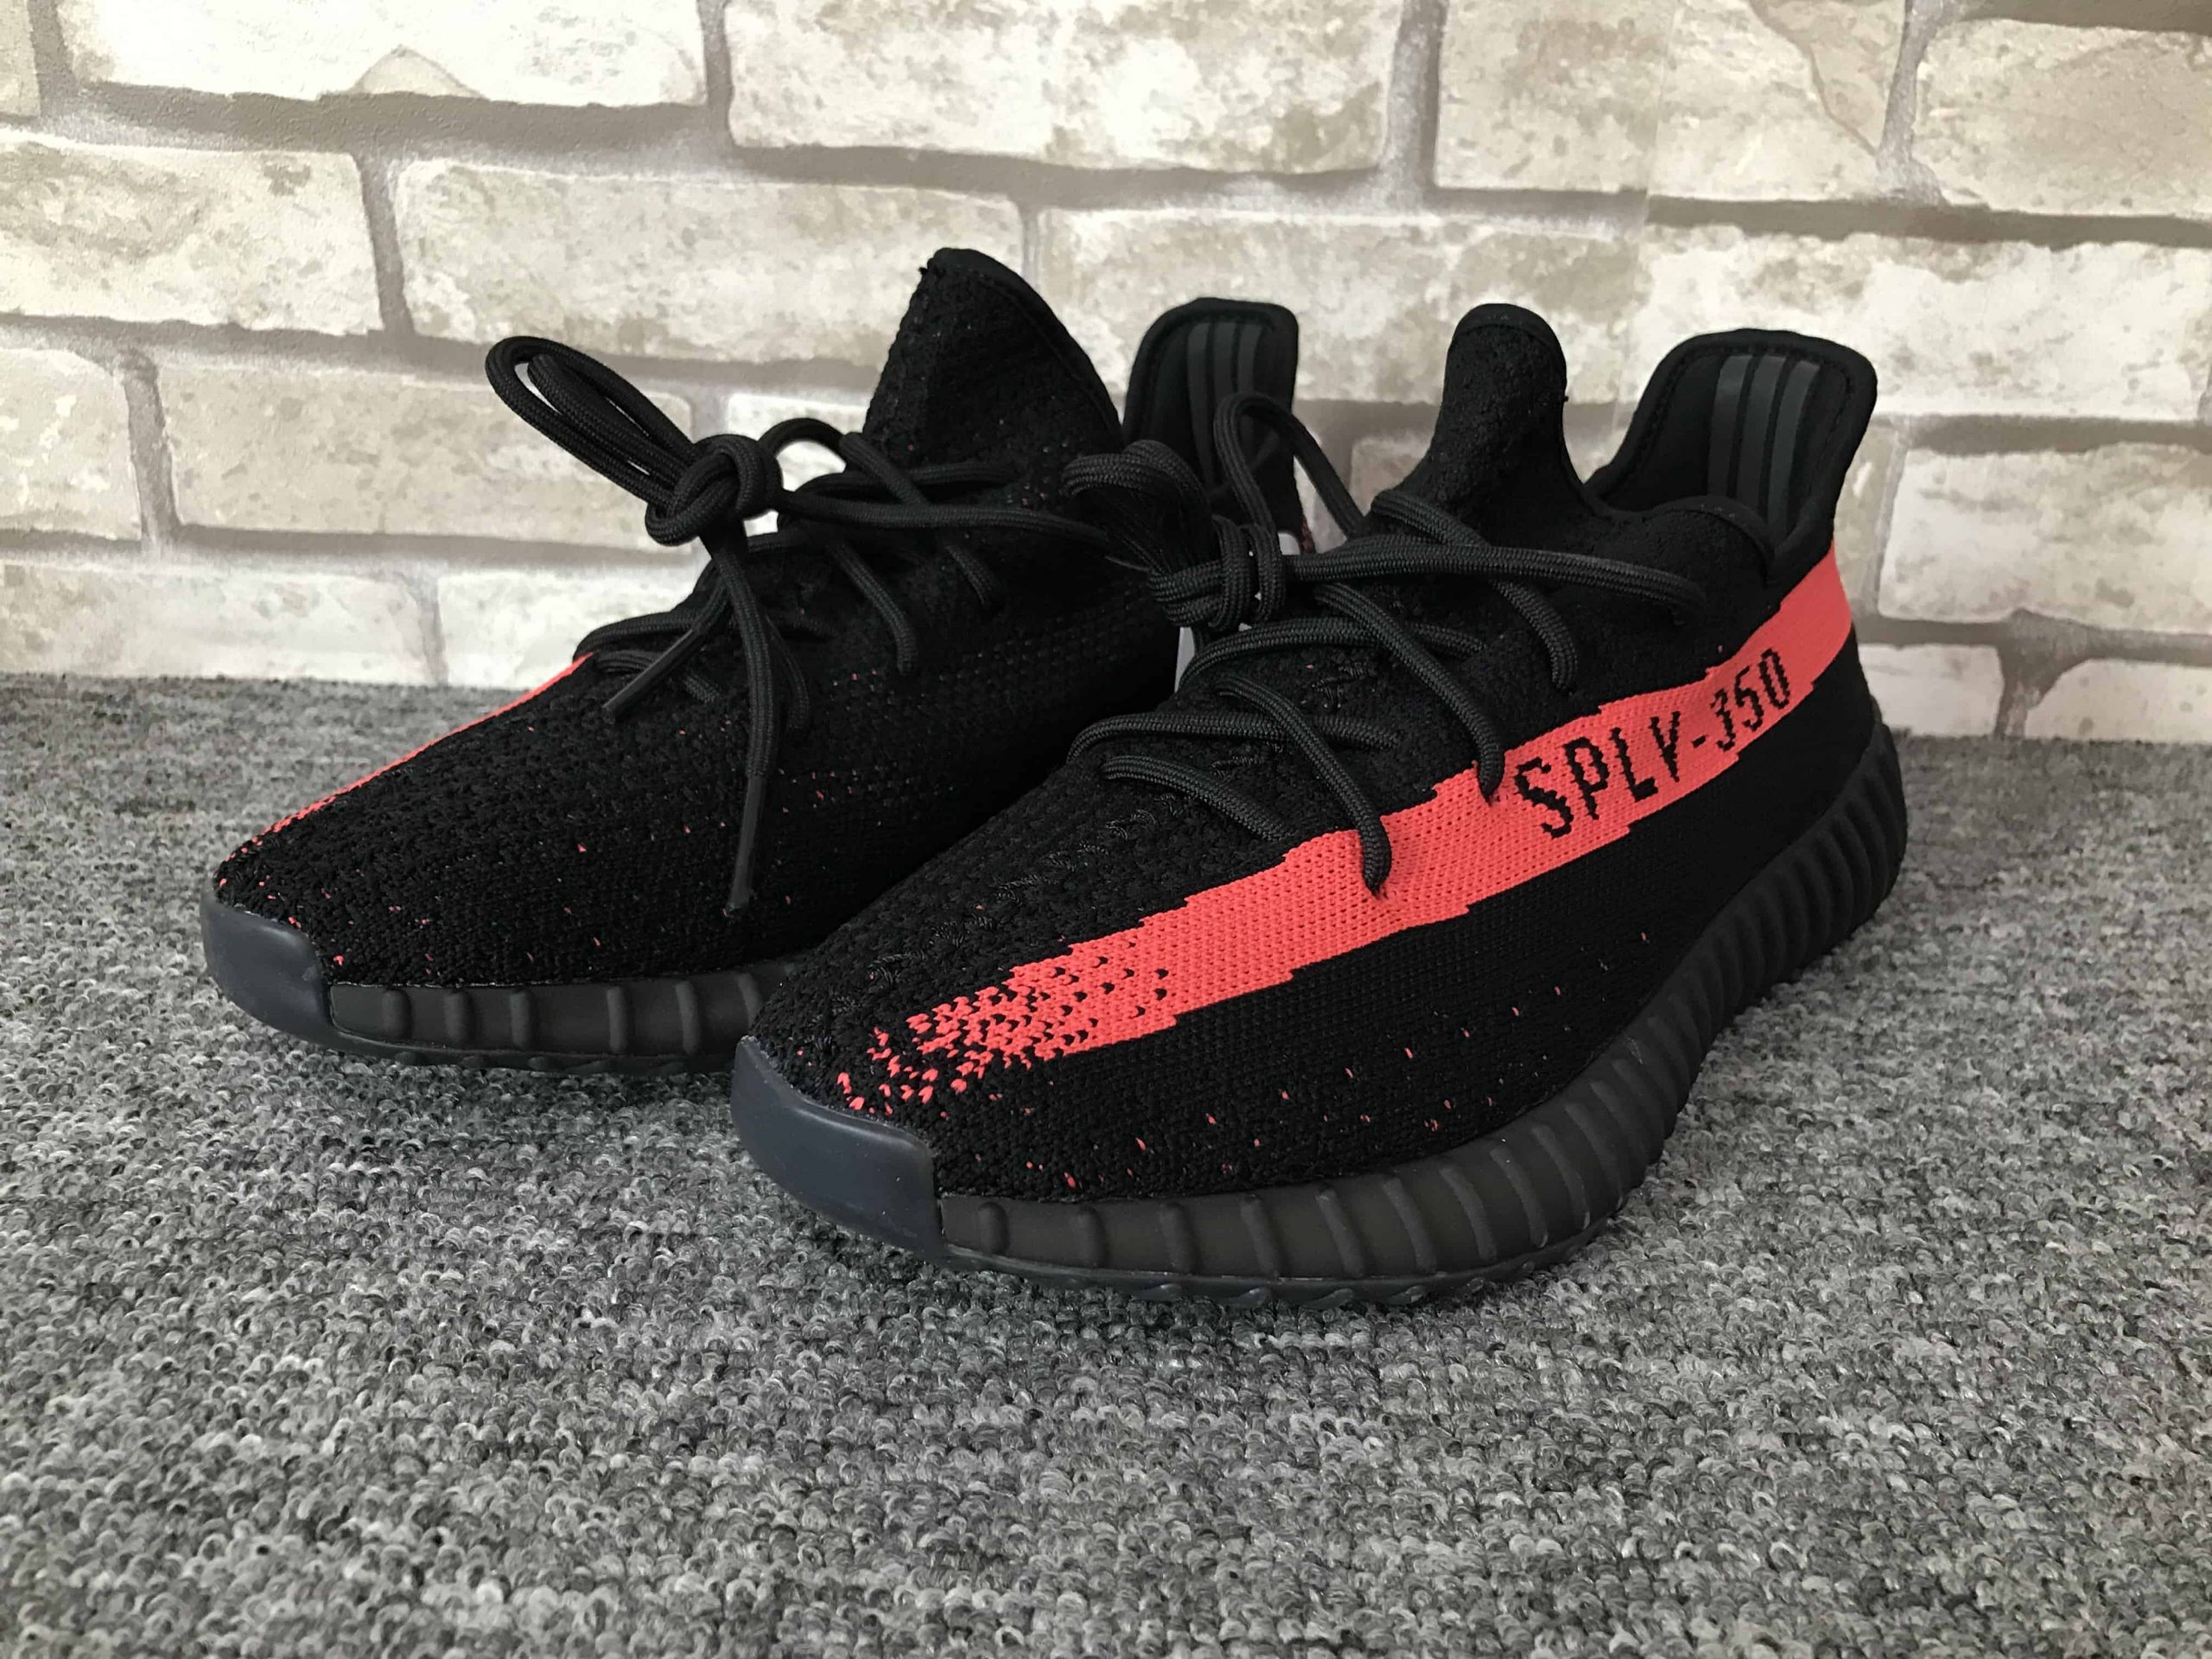 Adidas Yeezy 350 Boost V2 Black and red TrapXShop